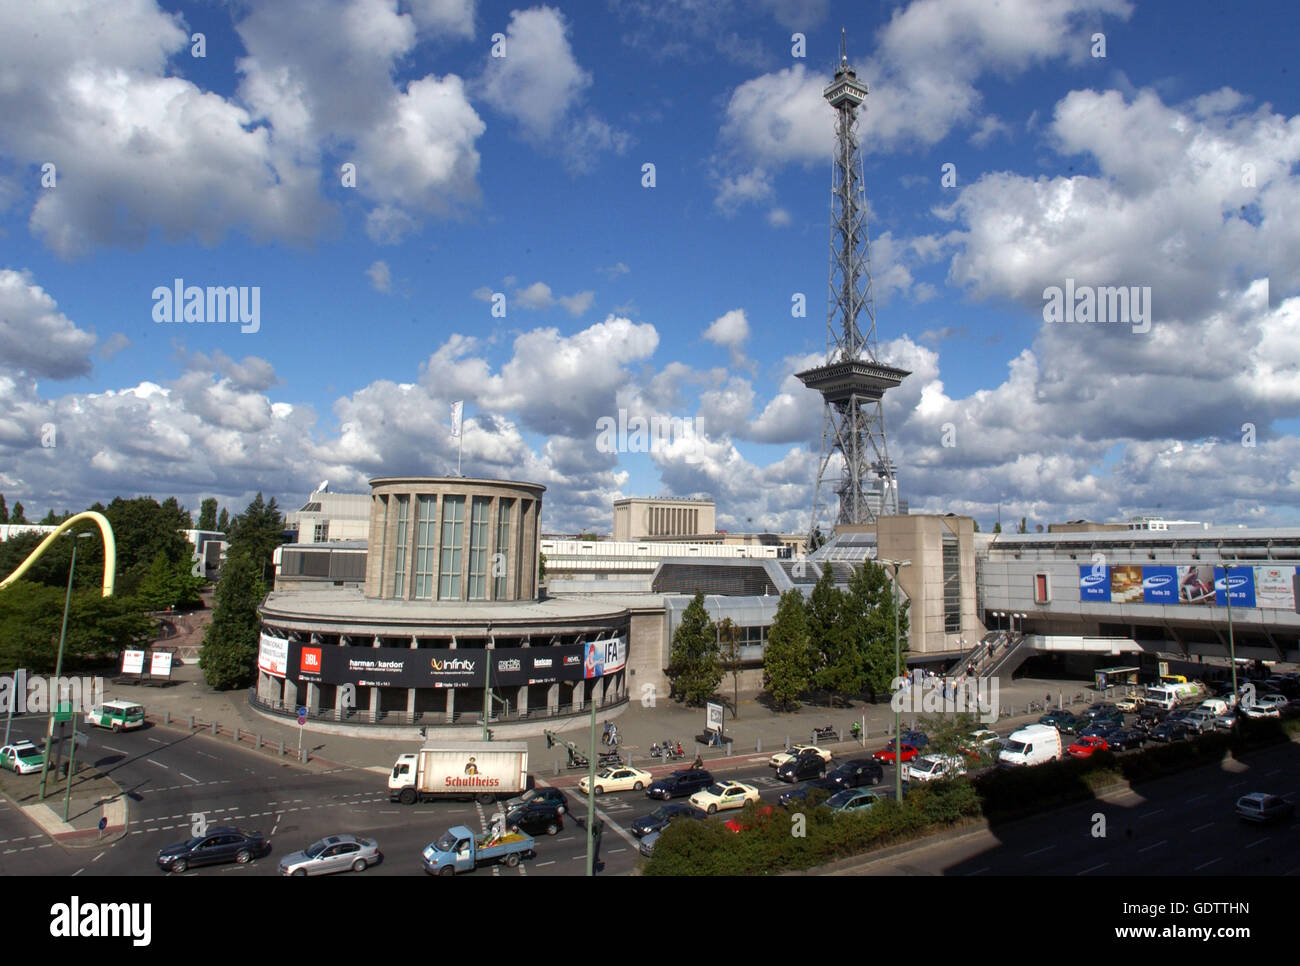 Radio Tower at the Messe Berlin fairgrounds Stock Photo